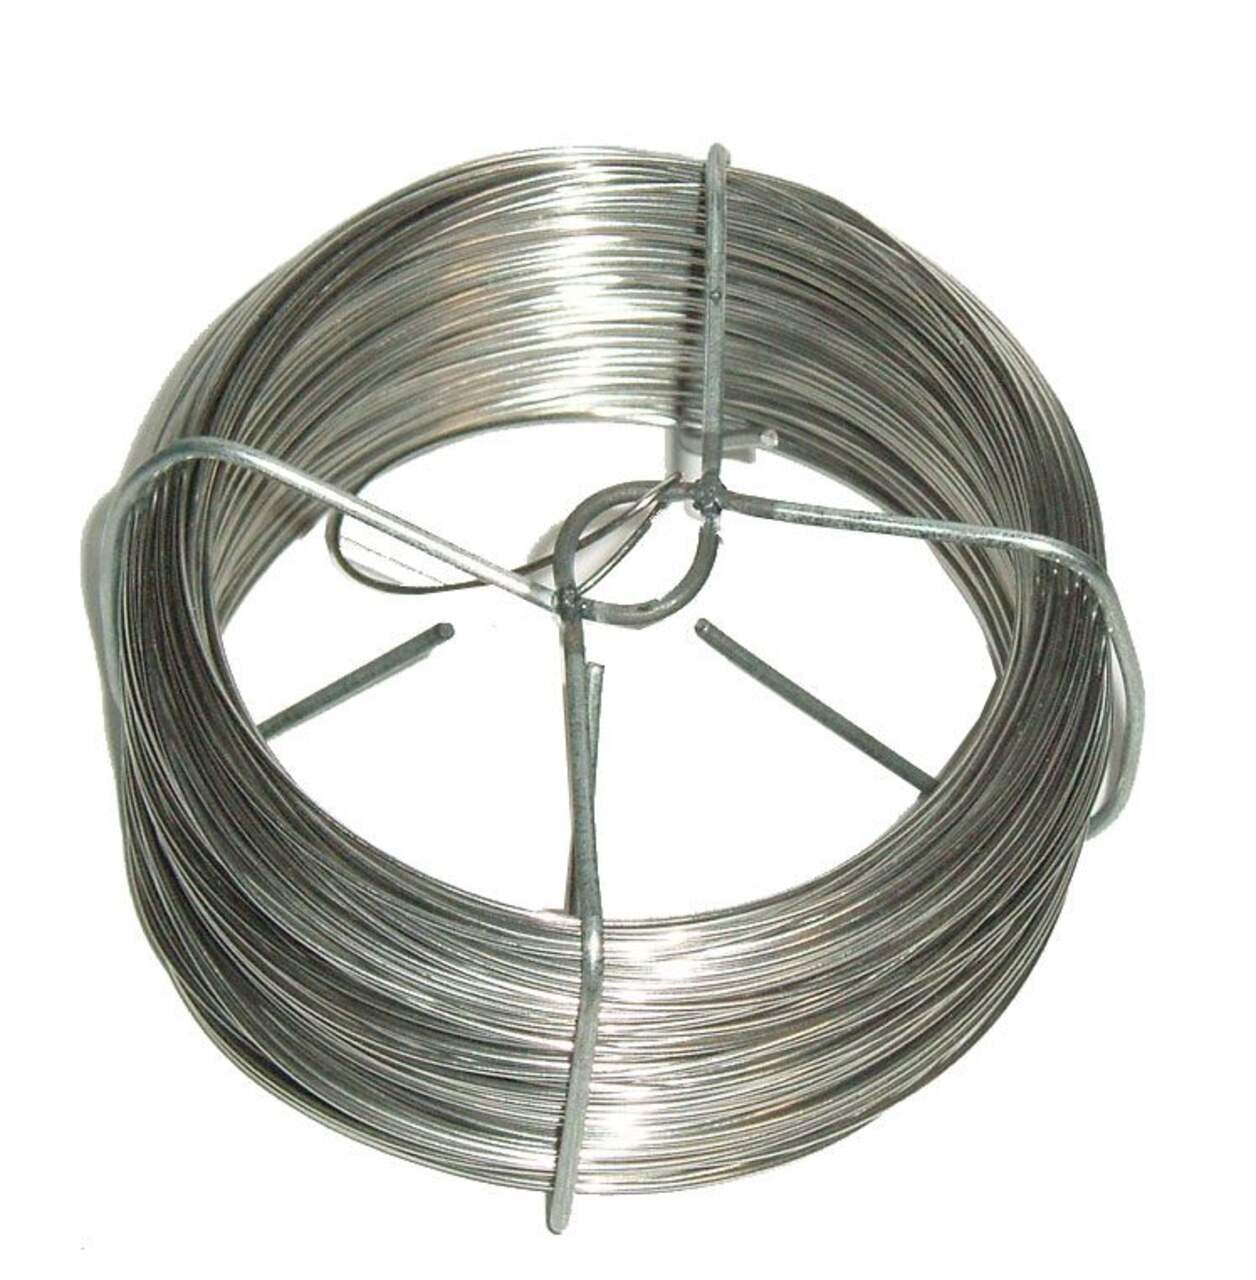 EXCEART 3 Rolls Jewelry Wire Stainless Steel Wire Snare Wire 20 Gauge Wire  Portable Steel Wire Professional Jewelry Making Wire Handcrafted Bendable